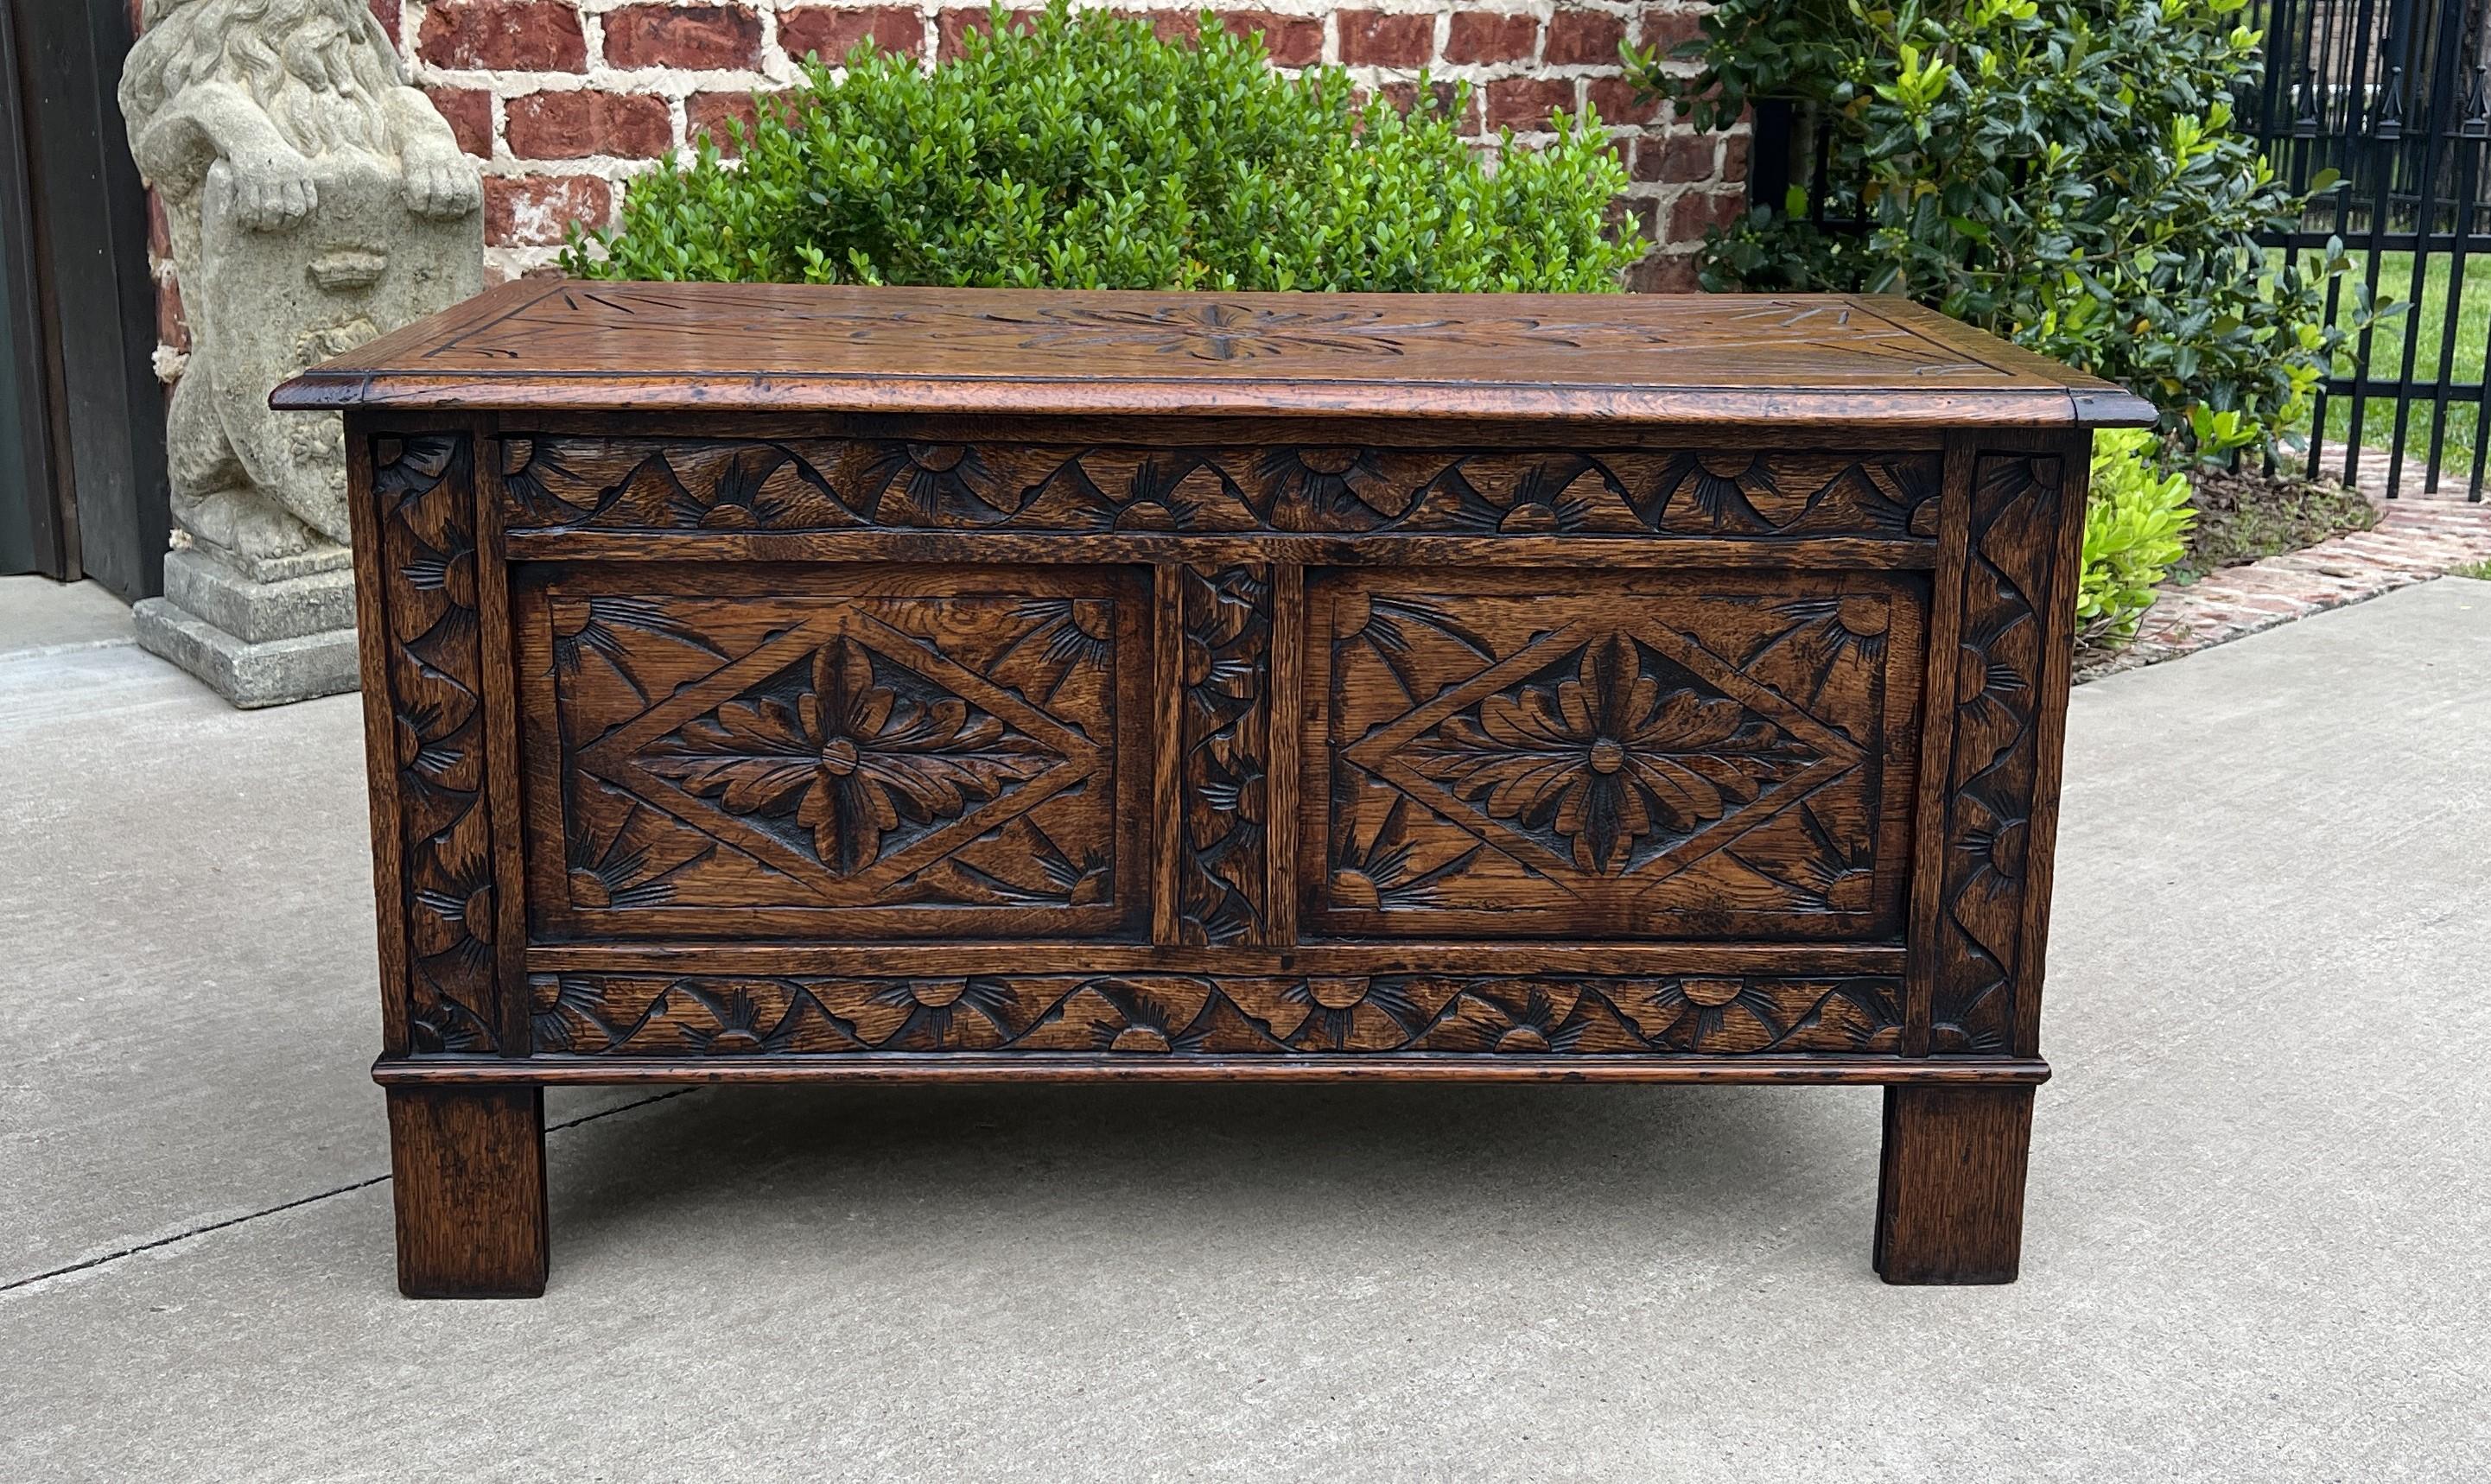 CHARMING Antique English Carved Oak Blanket Box, Coffer, Trunk, Storage Chest, Coffee Table or Bench~~c. 1920-30s

 The perfect size for a foyer, entry hall or mudroom bench, or as a coffee table. Excellent example of the hand carved craftsmanship